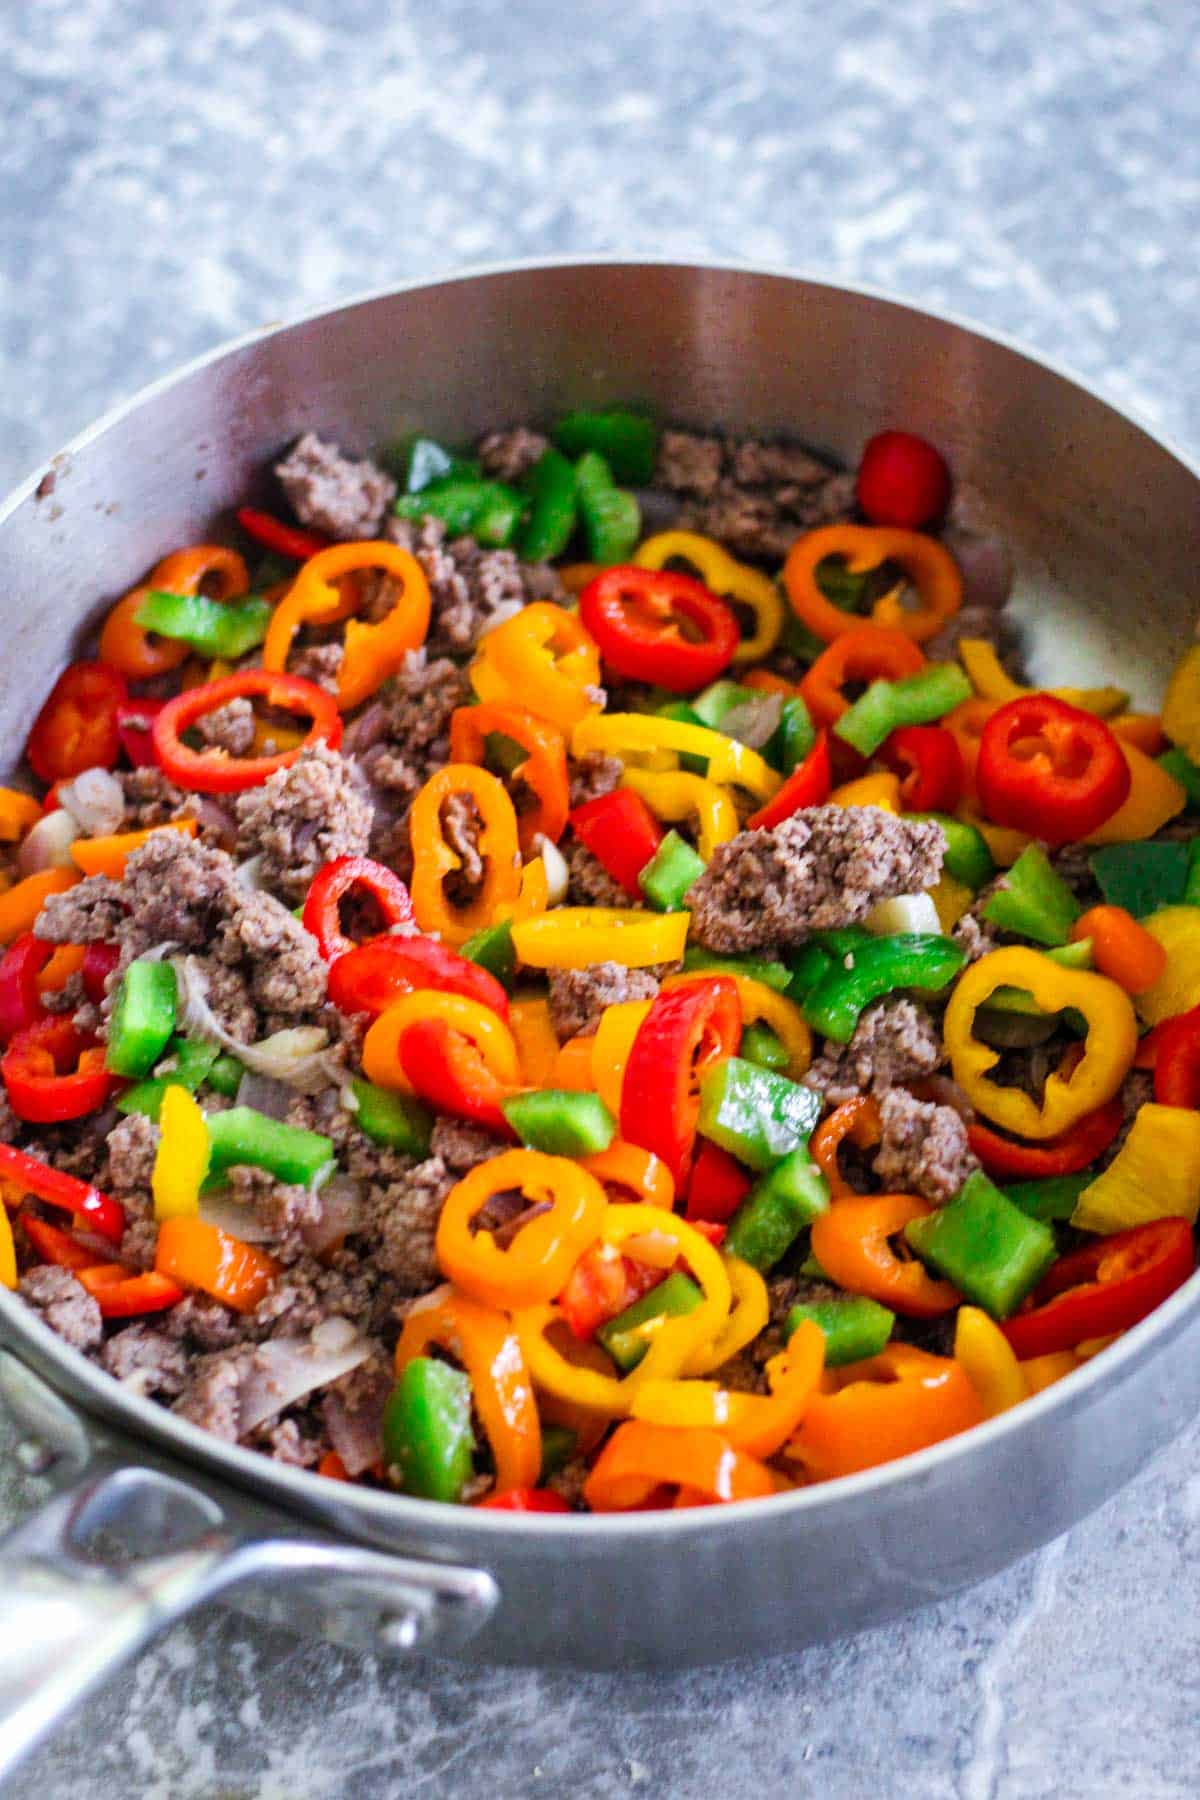 Adding chopped peppers over browned beef.